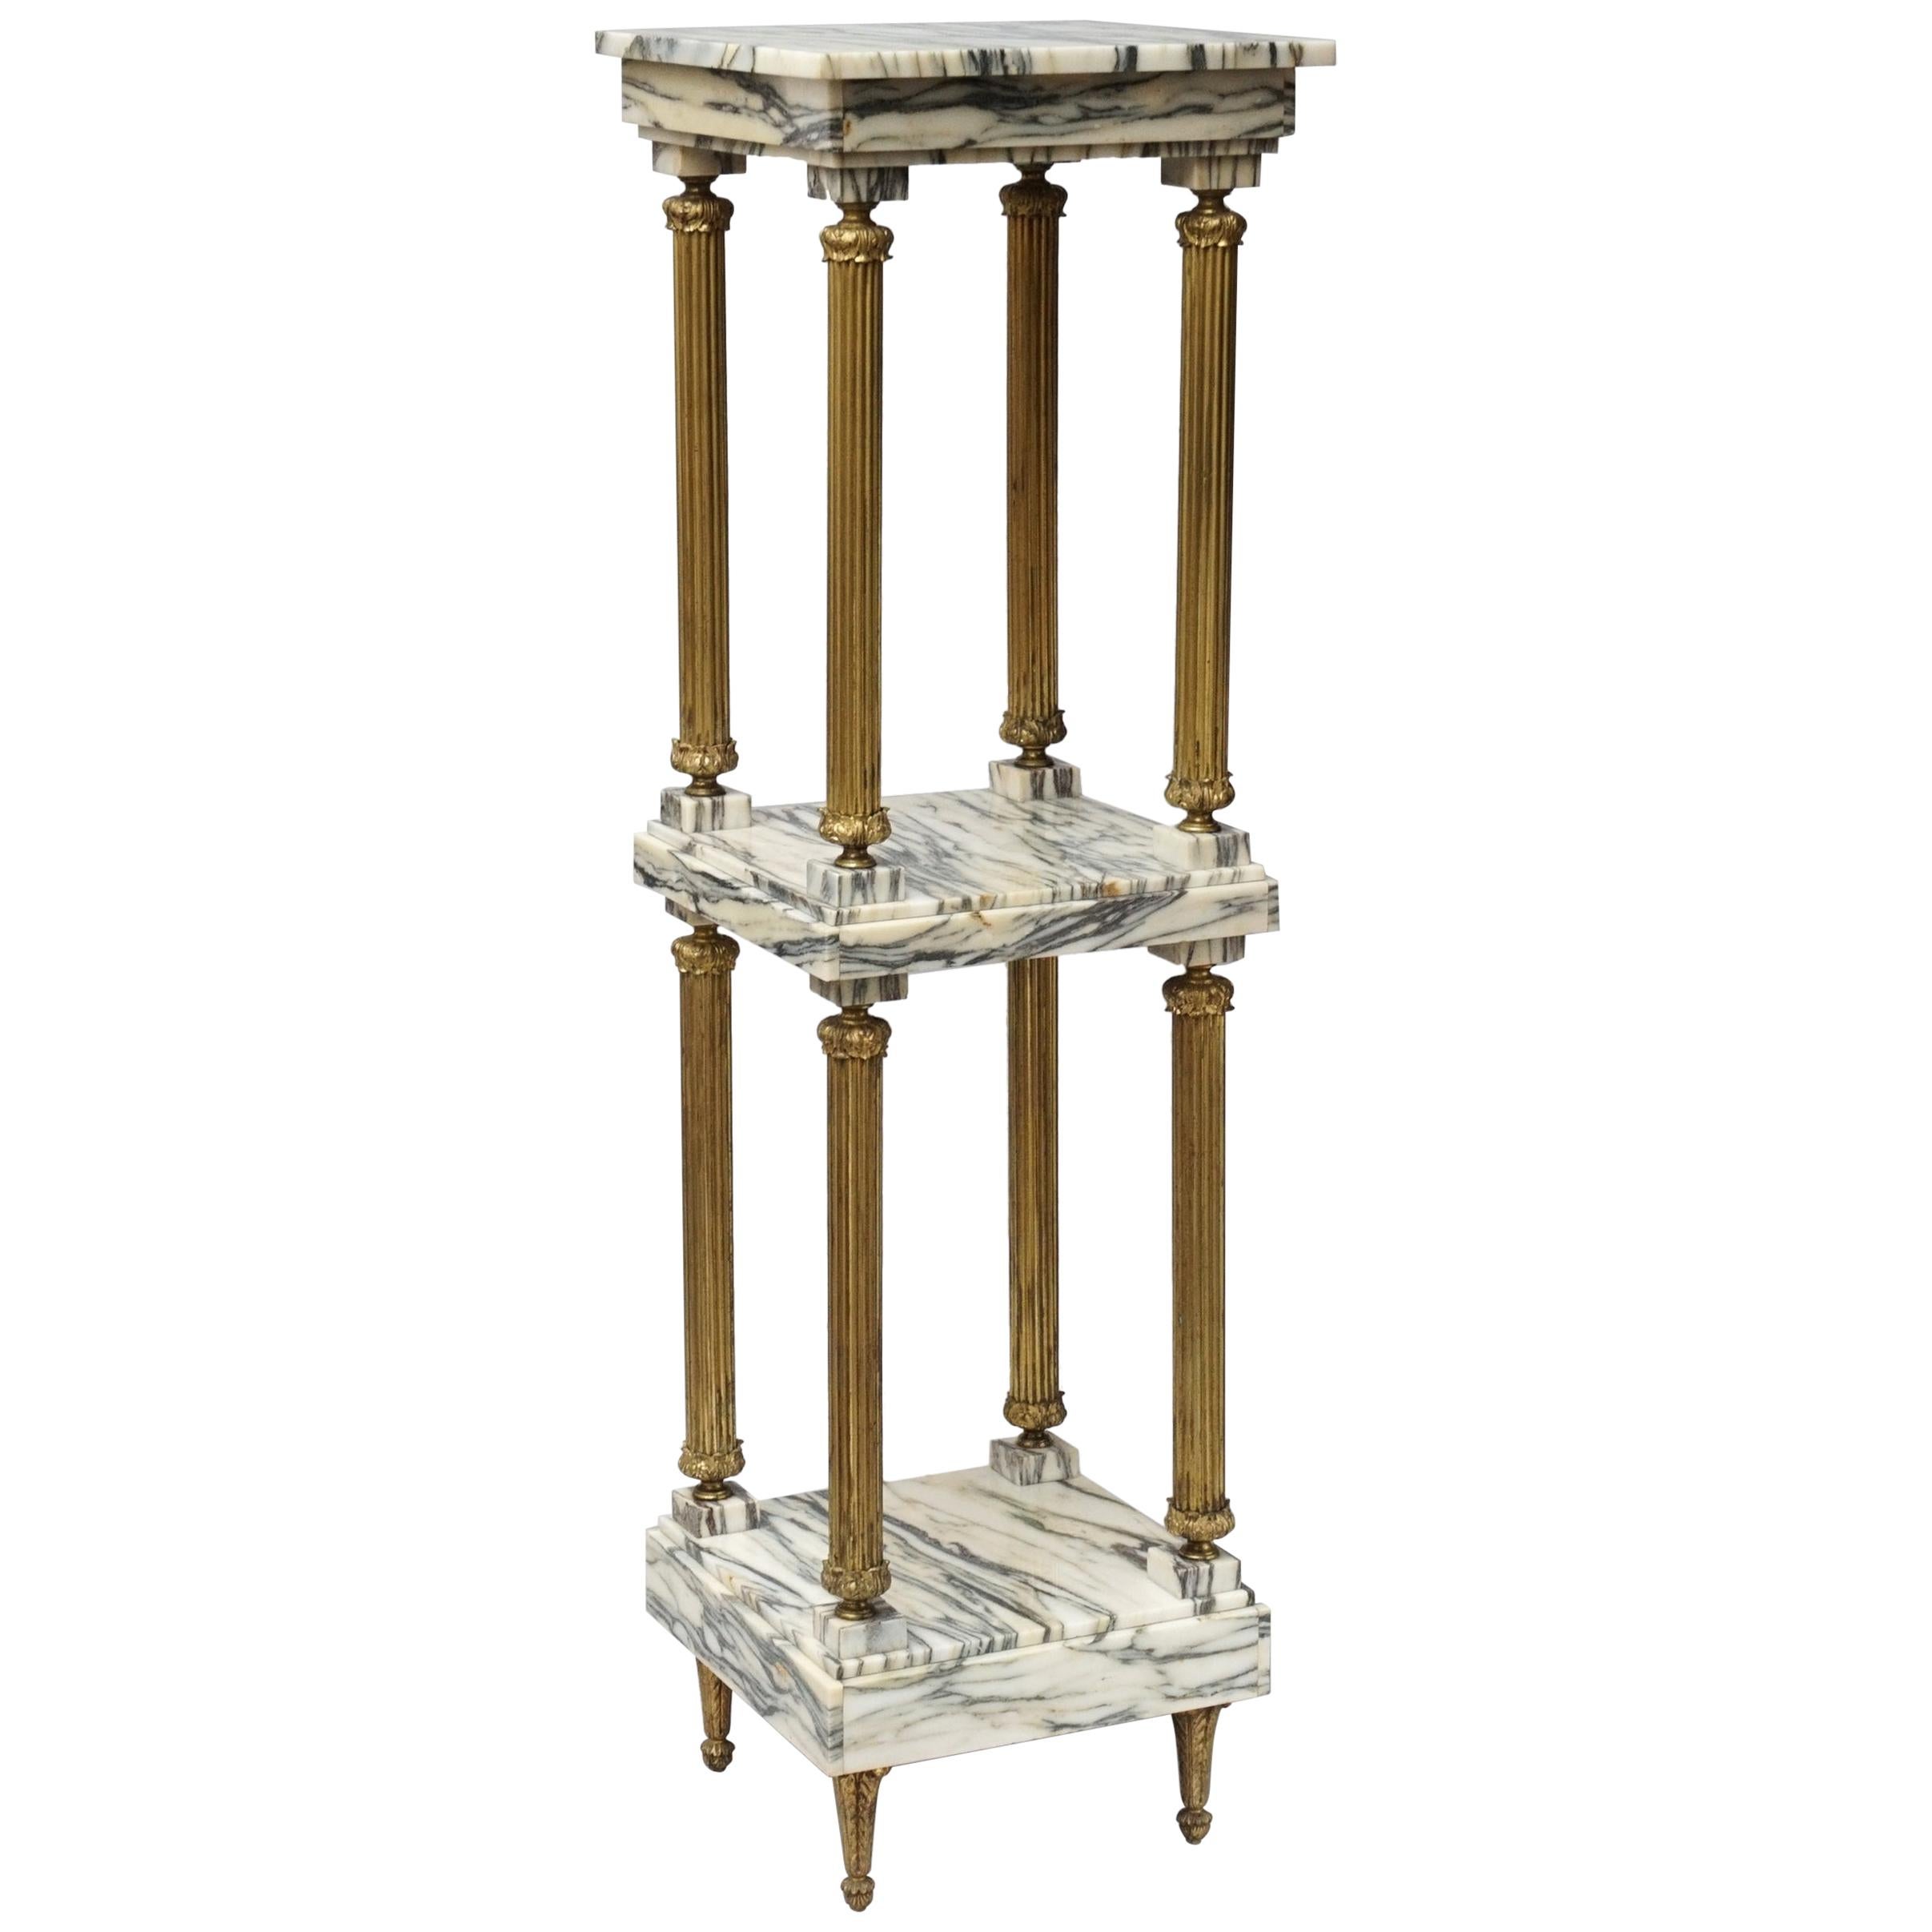 Midcentury Neoclassical Marble and Gilt Brass Three-Tier Étagère Shelf Stand